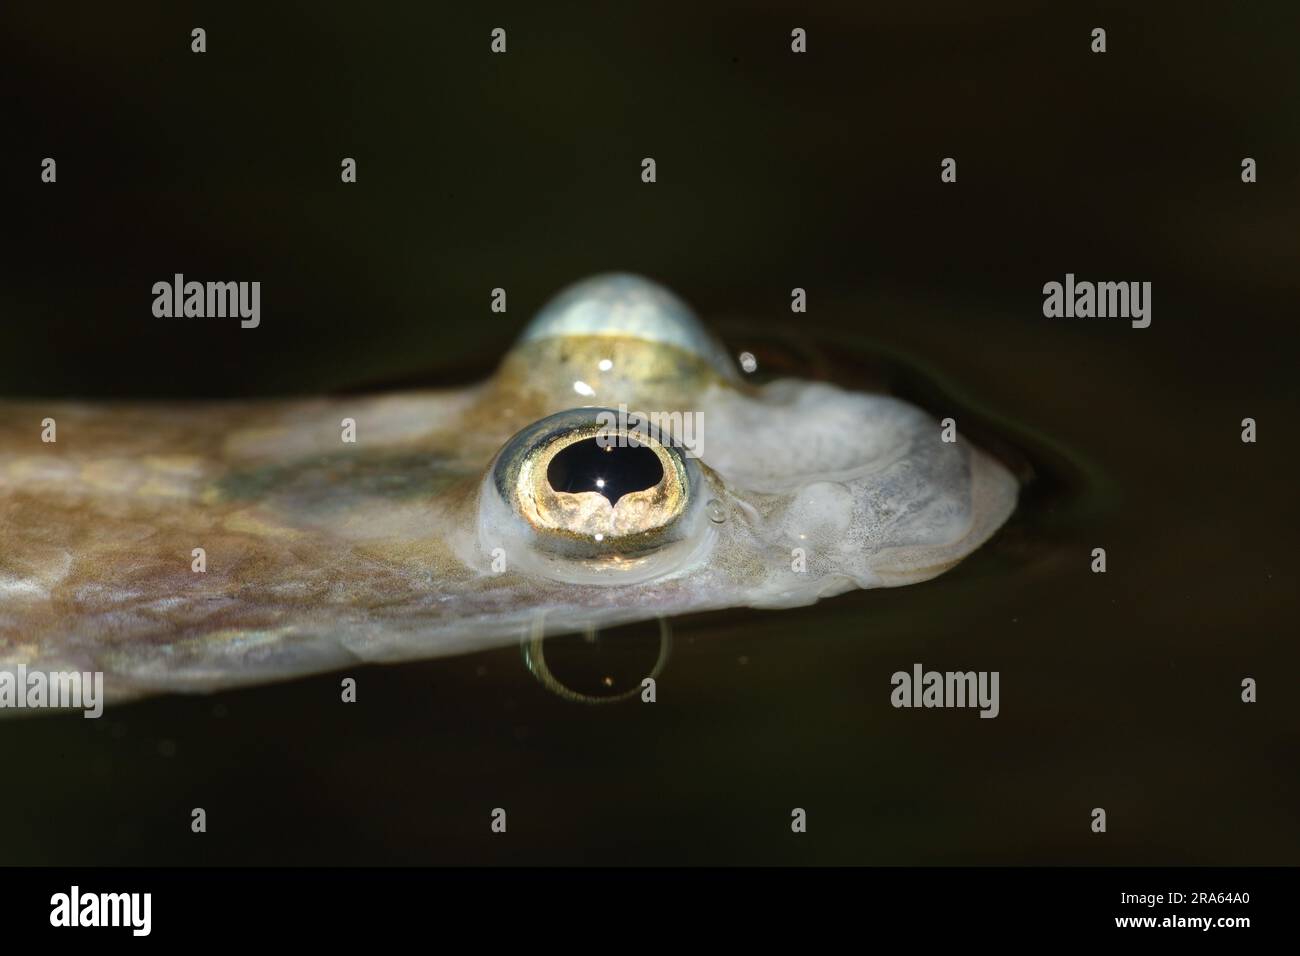 Four-eyed fish (Anableps anableps) Stock Photo